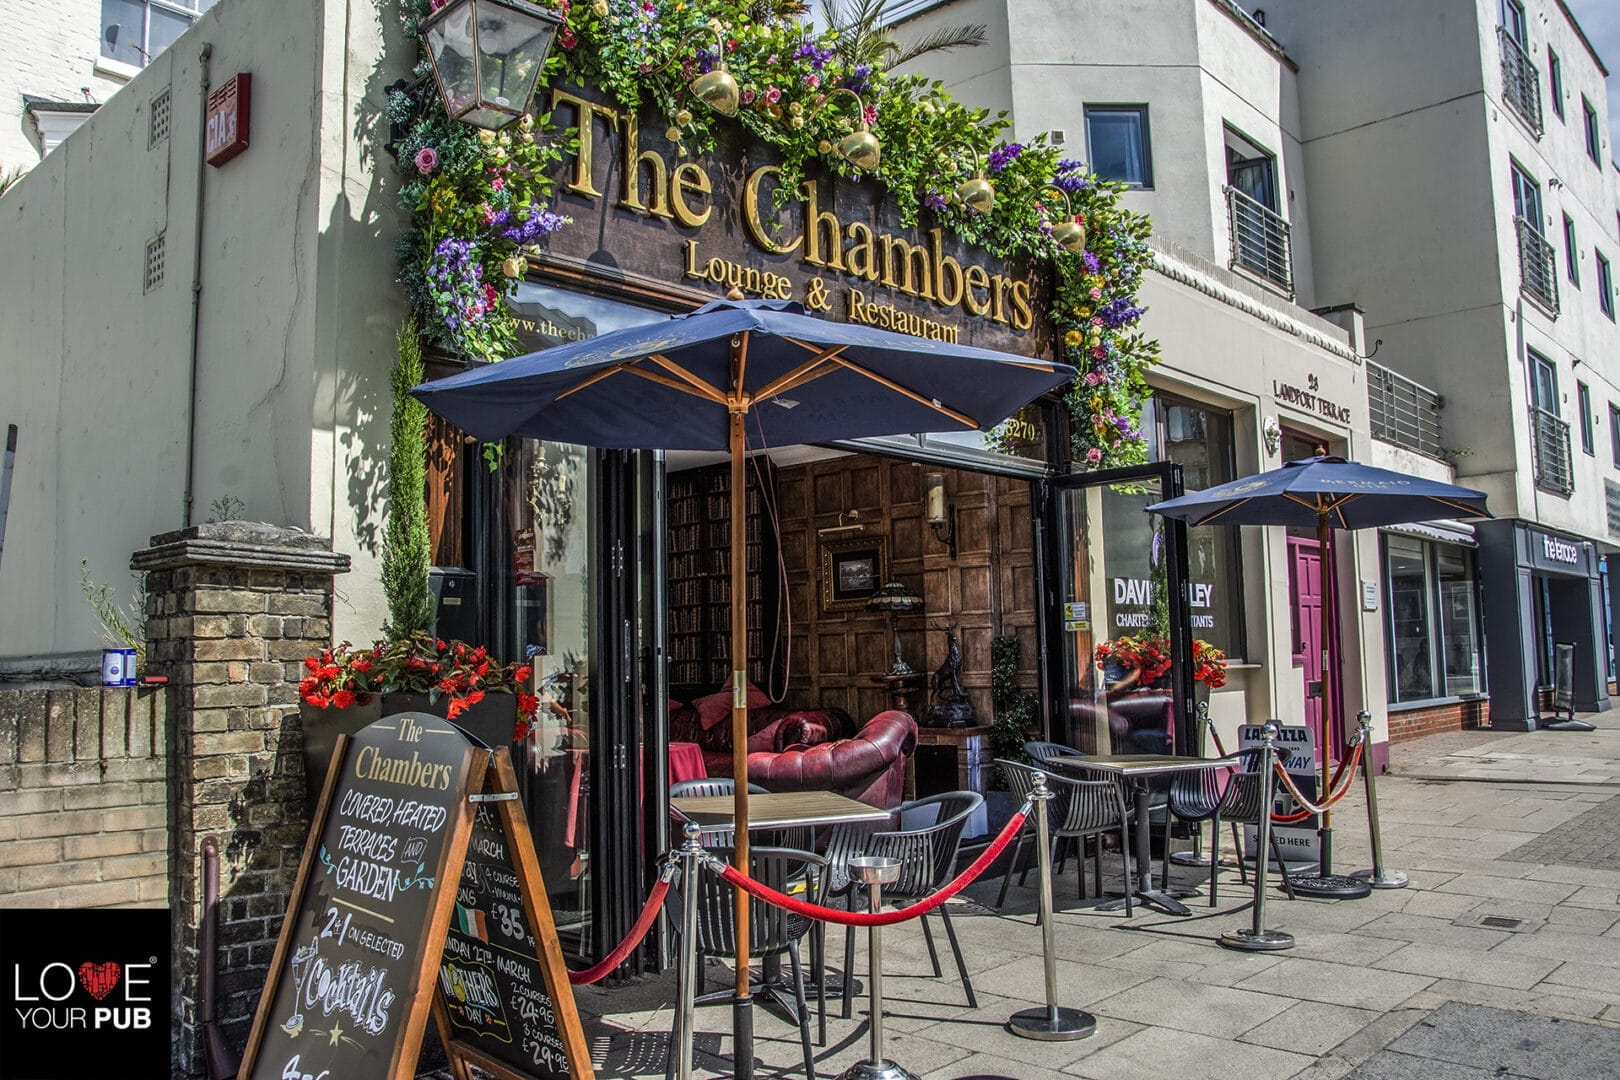 The Chambers Restaurant Portsmouth